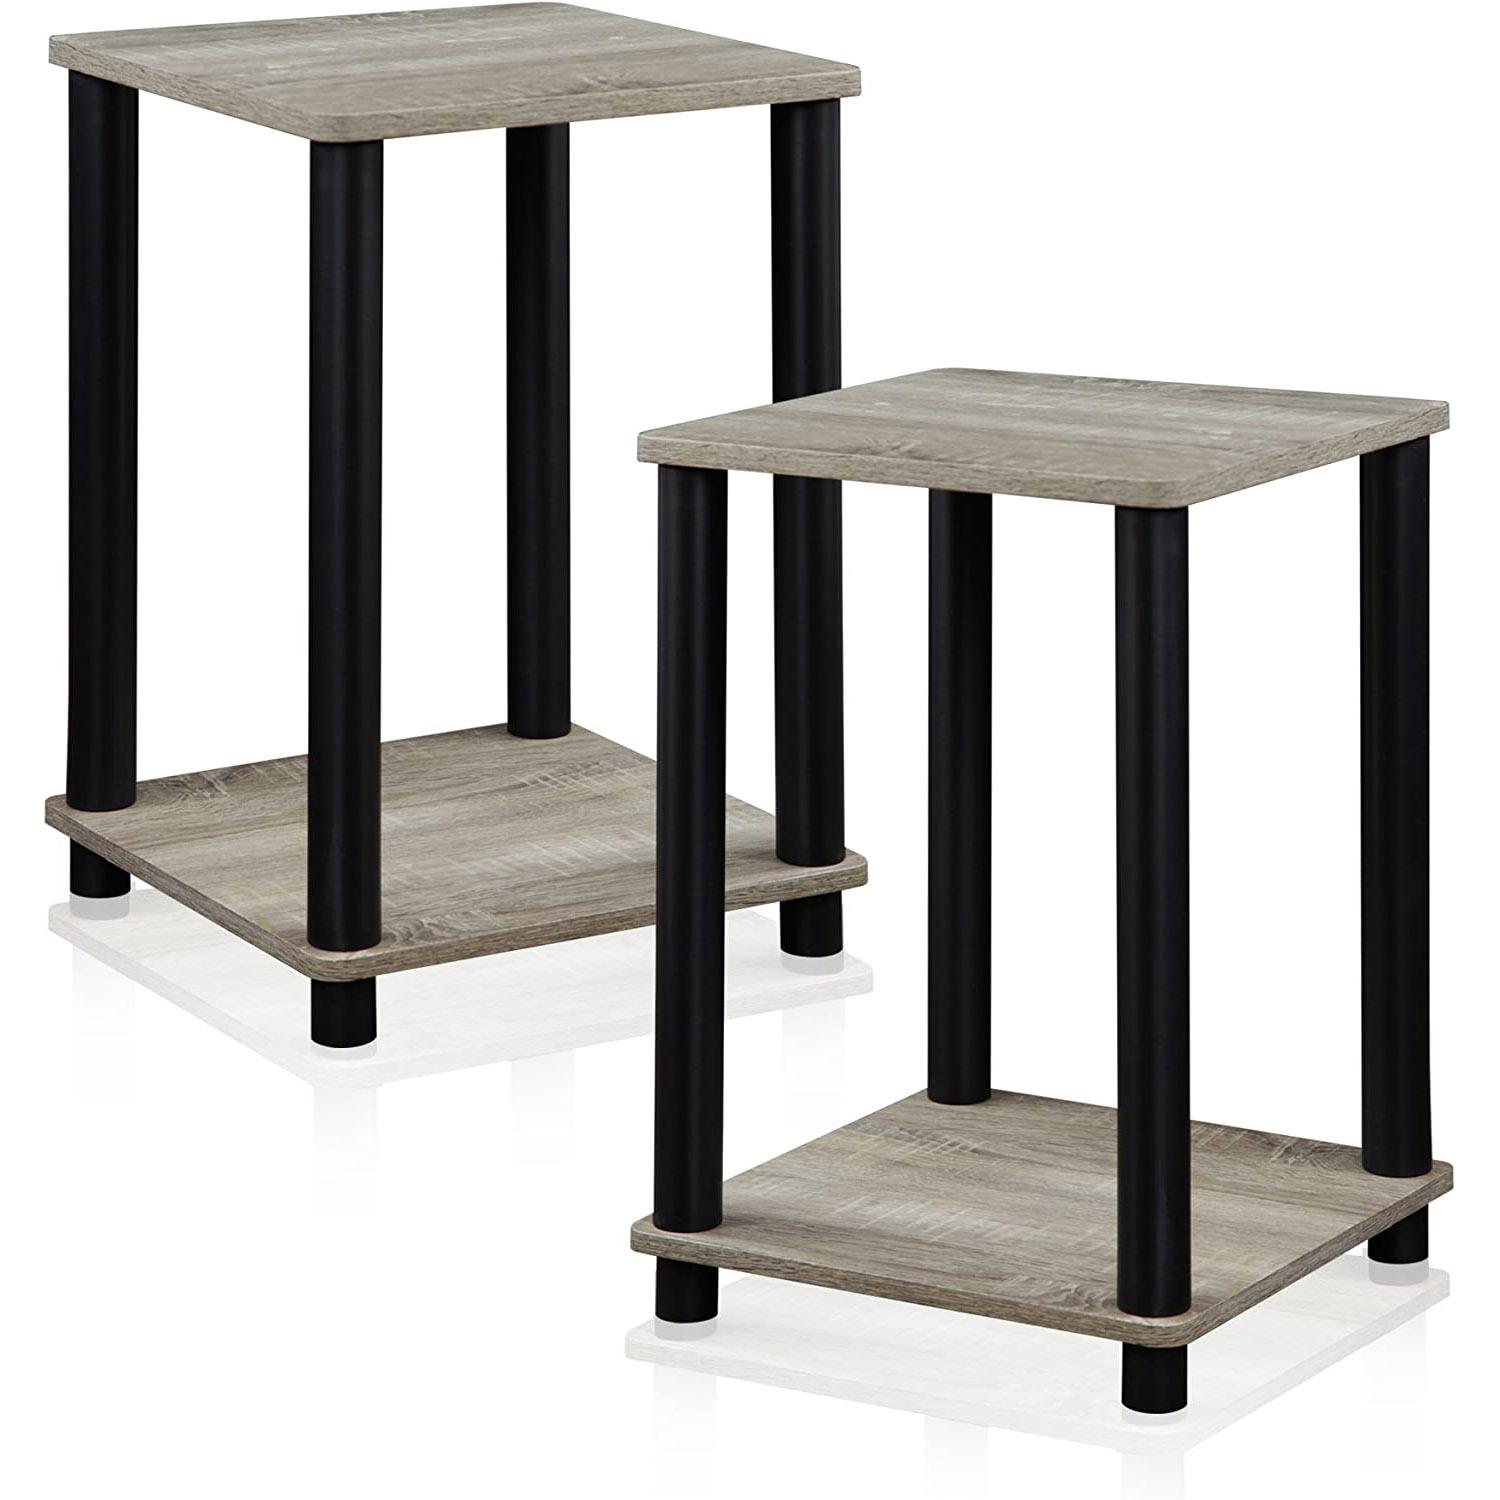 Stylish End Tables 2 Sets for $25 Shipped